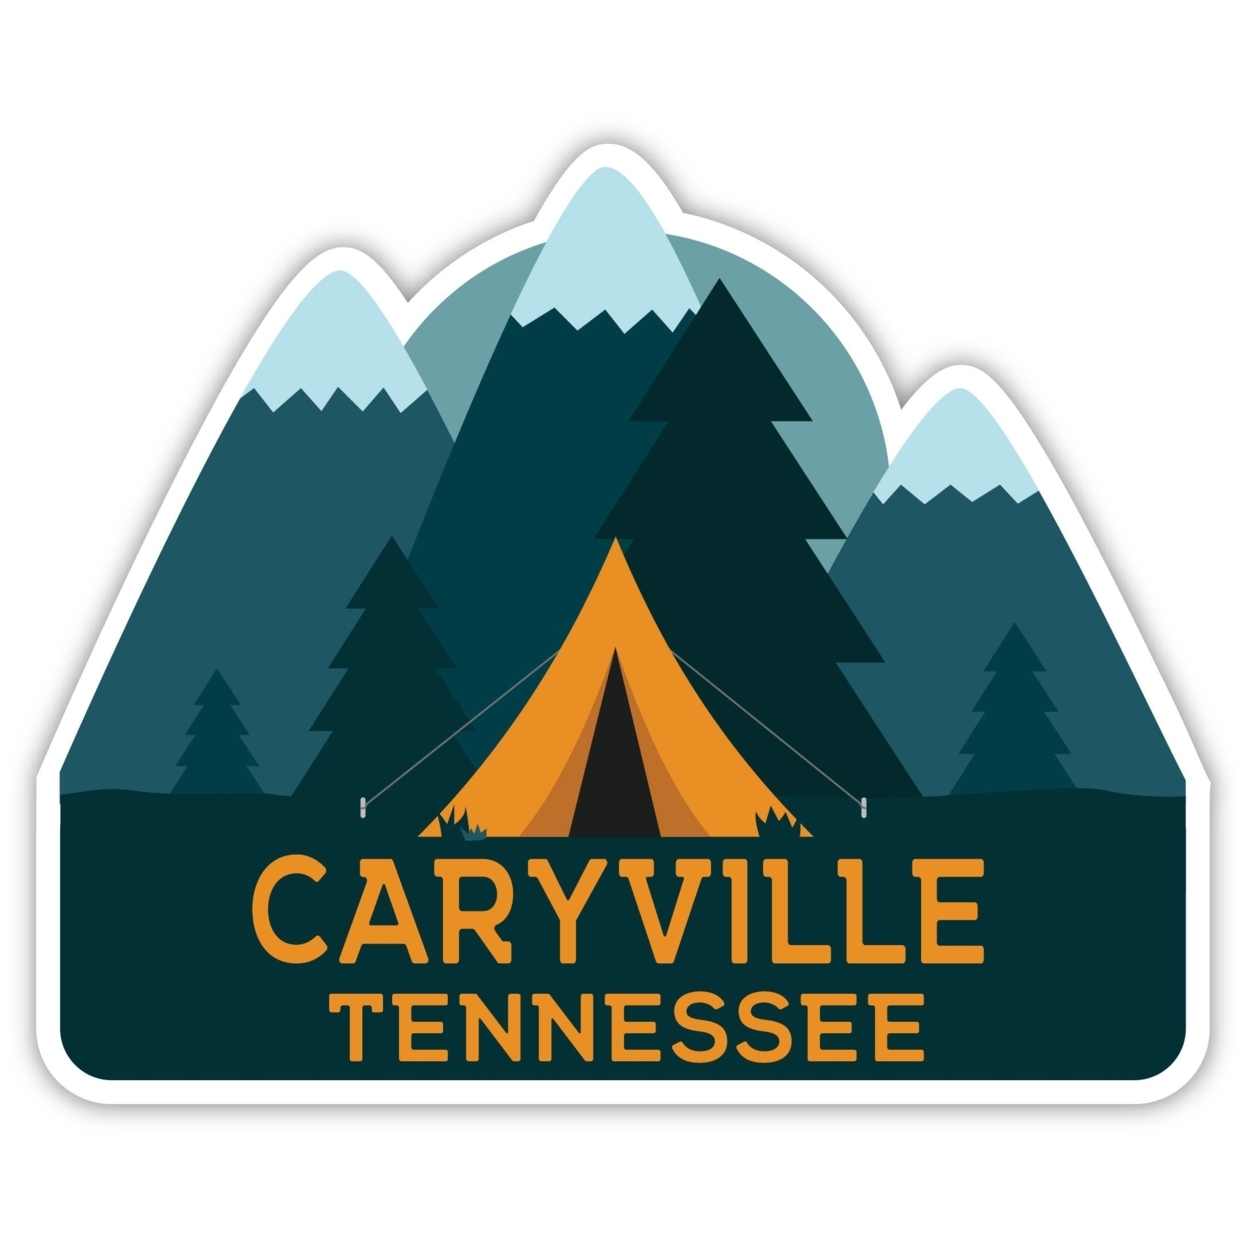 Caryville Tennessee Souvenir Decorative Stickers (Choose Theme And Size) - 4-Pack, 2-Inch, Tent